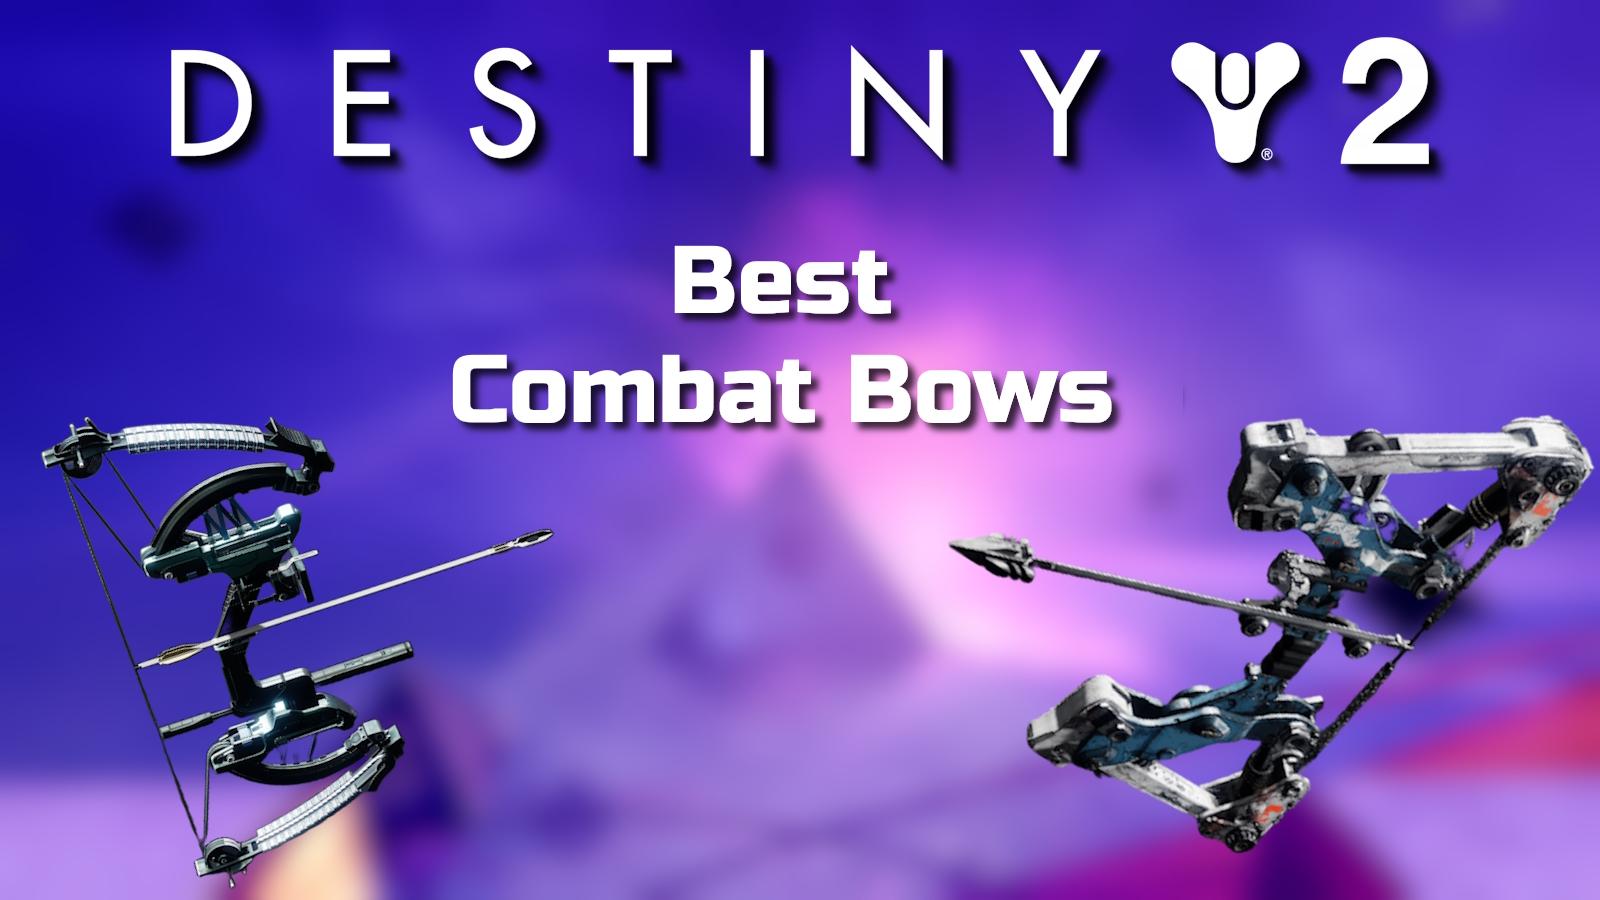 The best combat bows in Destiny 2 for PvE and PvP.